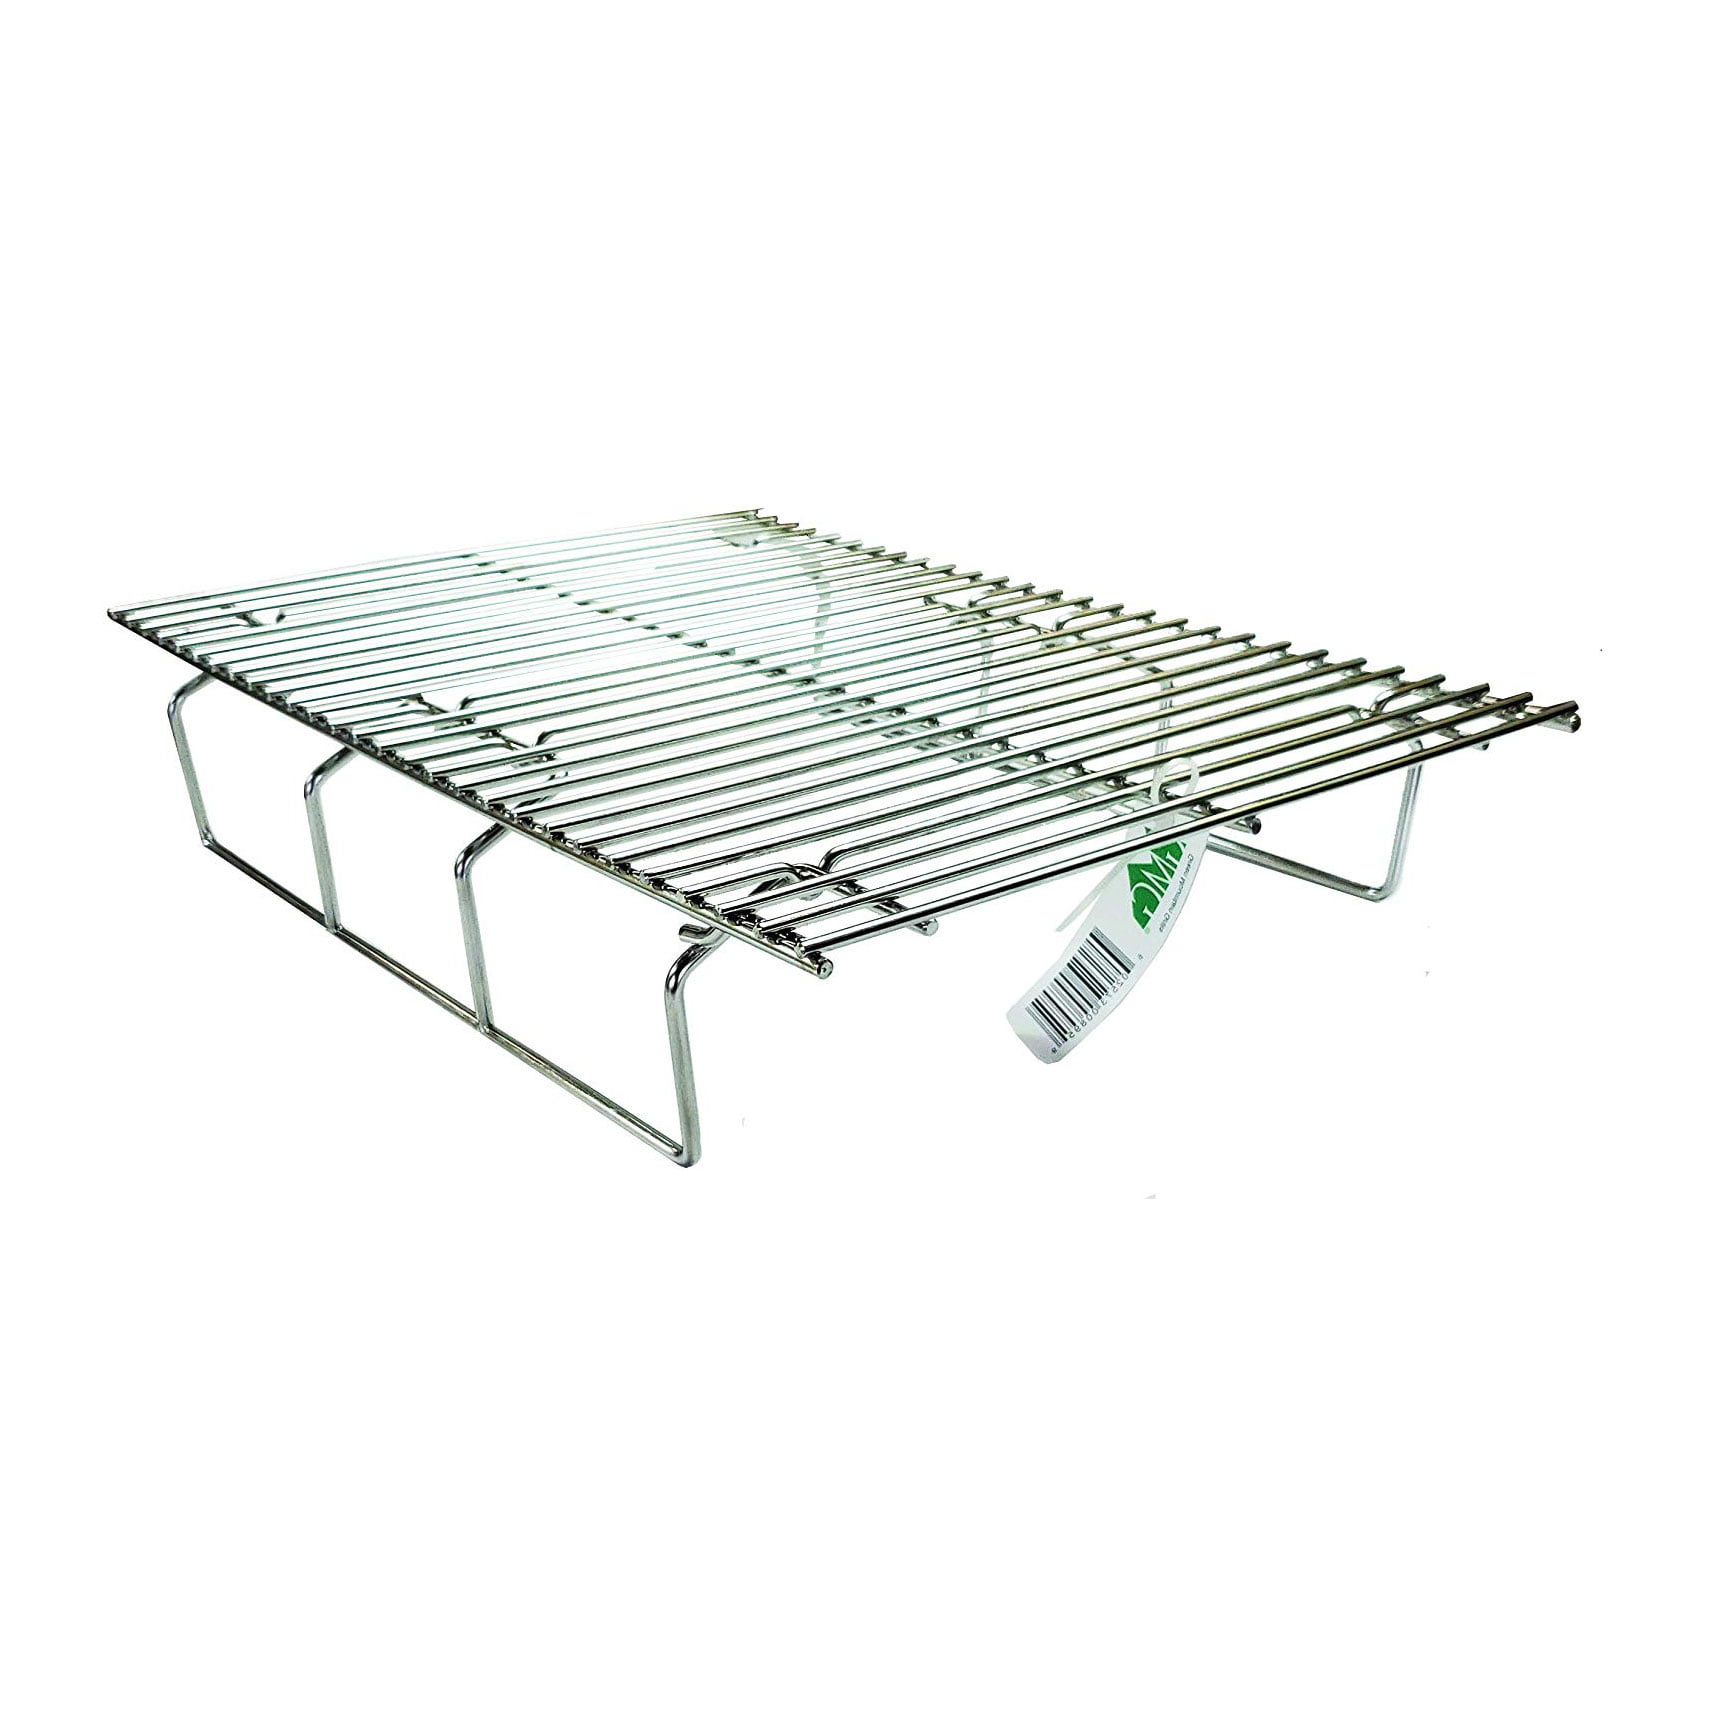 QuliMetal Grill Rack for Green Mountain Grill Gmg-6008 Upper Rack Fits Daniel Boone Pellet Grill Green Mountain Grills GMG Grill Grate Accessories Warming Rack Replacement Part